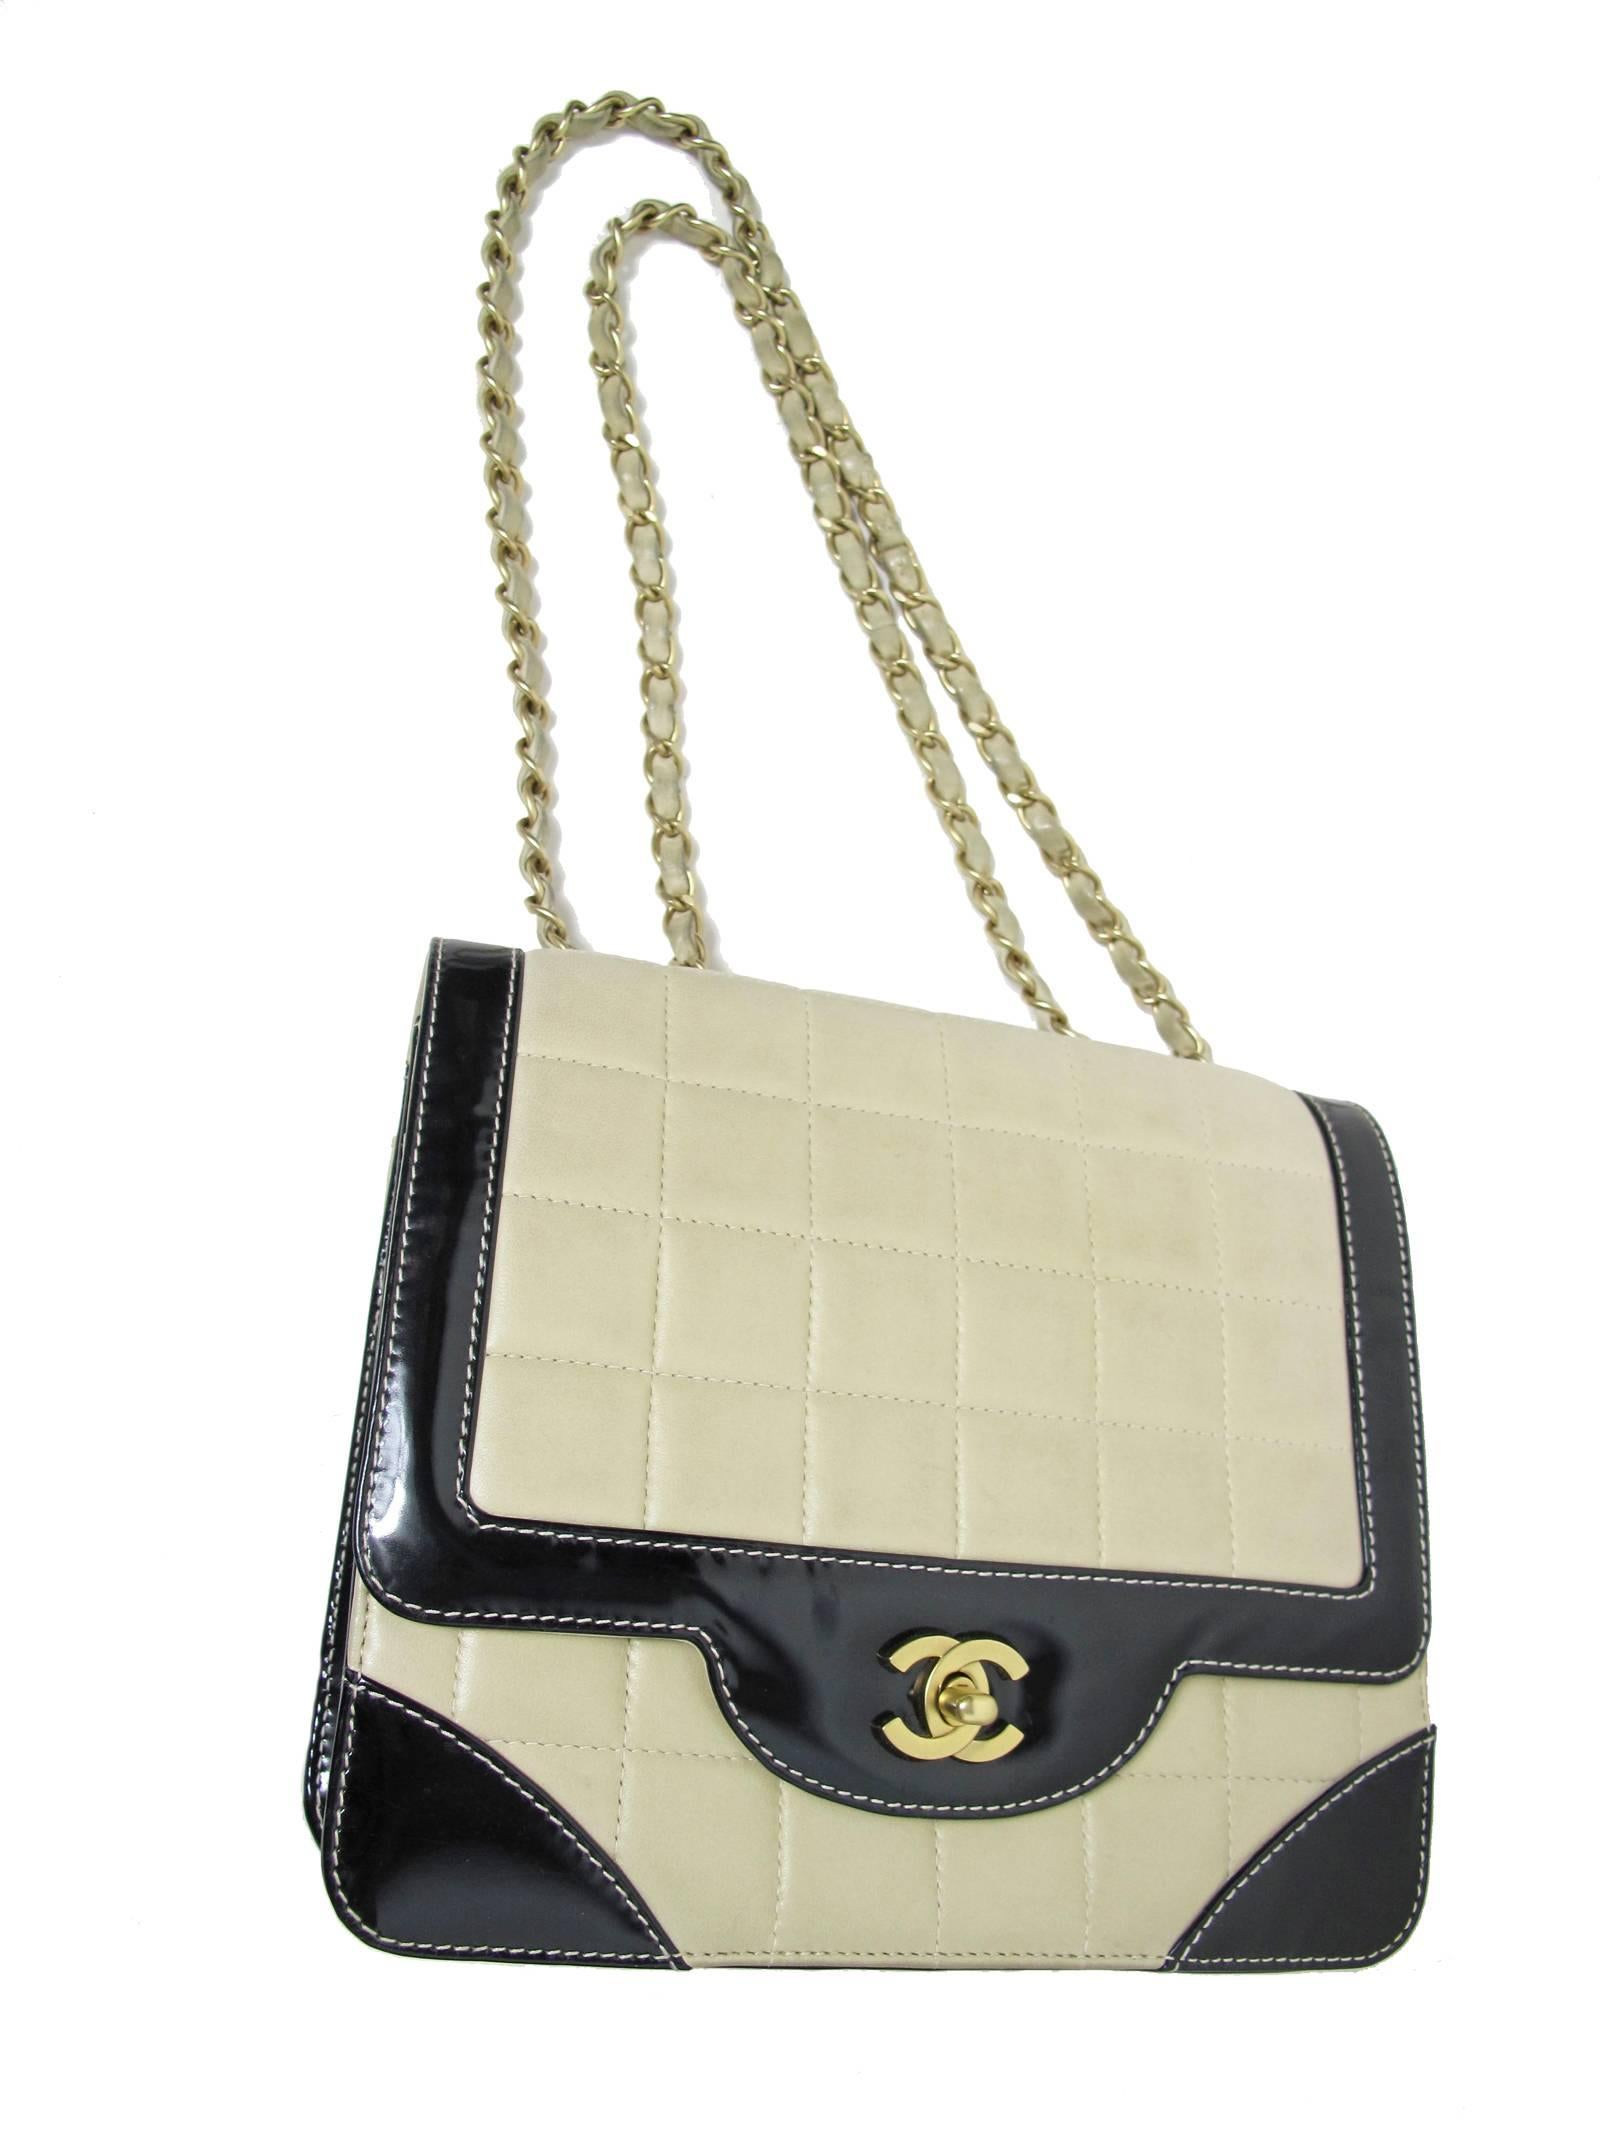 Beige Chanel Quilted Leather and Patent Bag - Sale